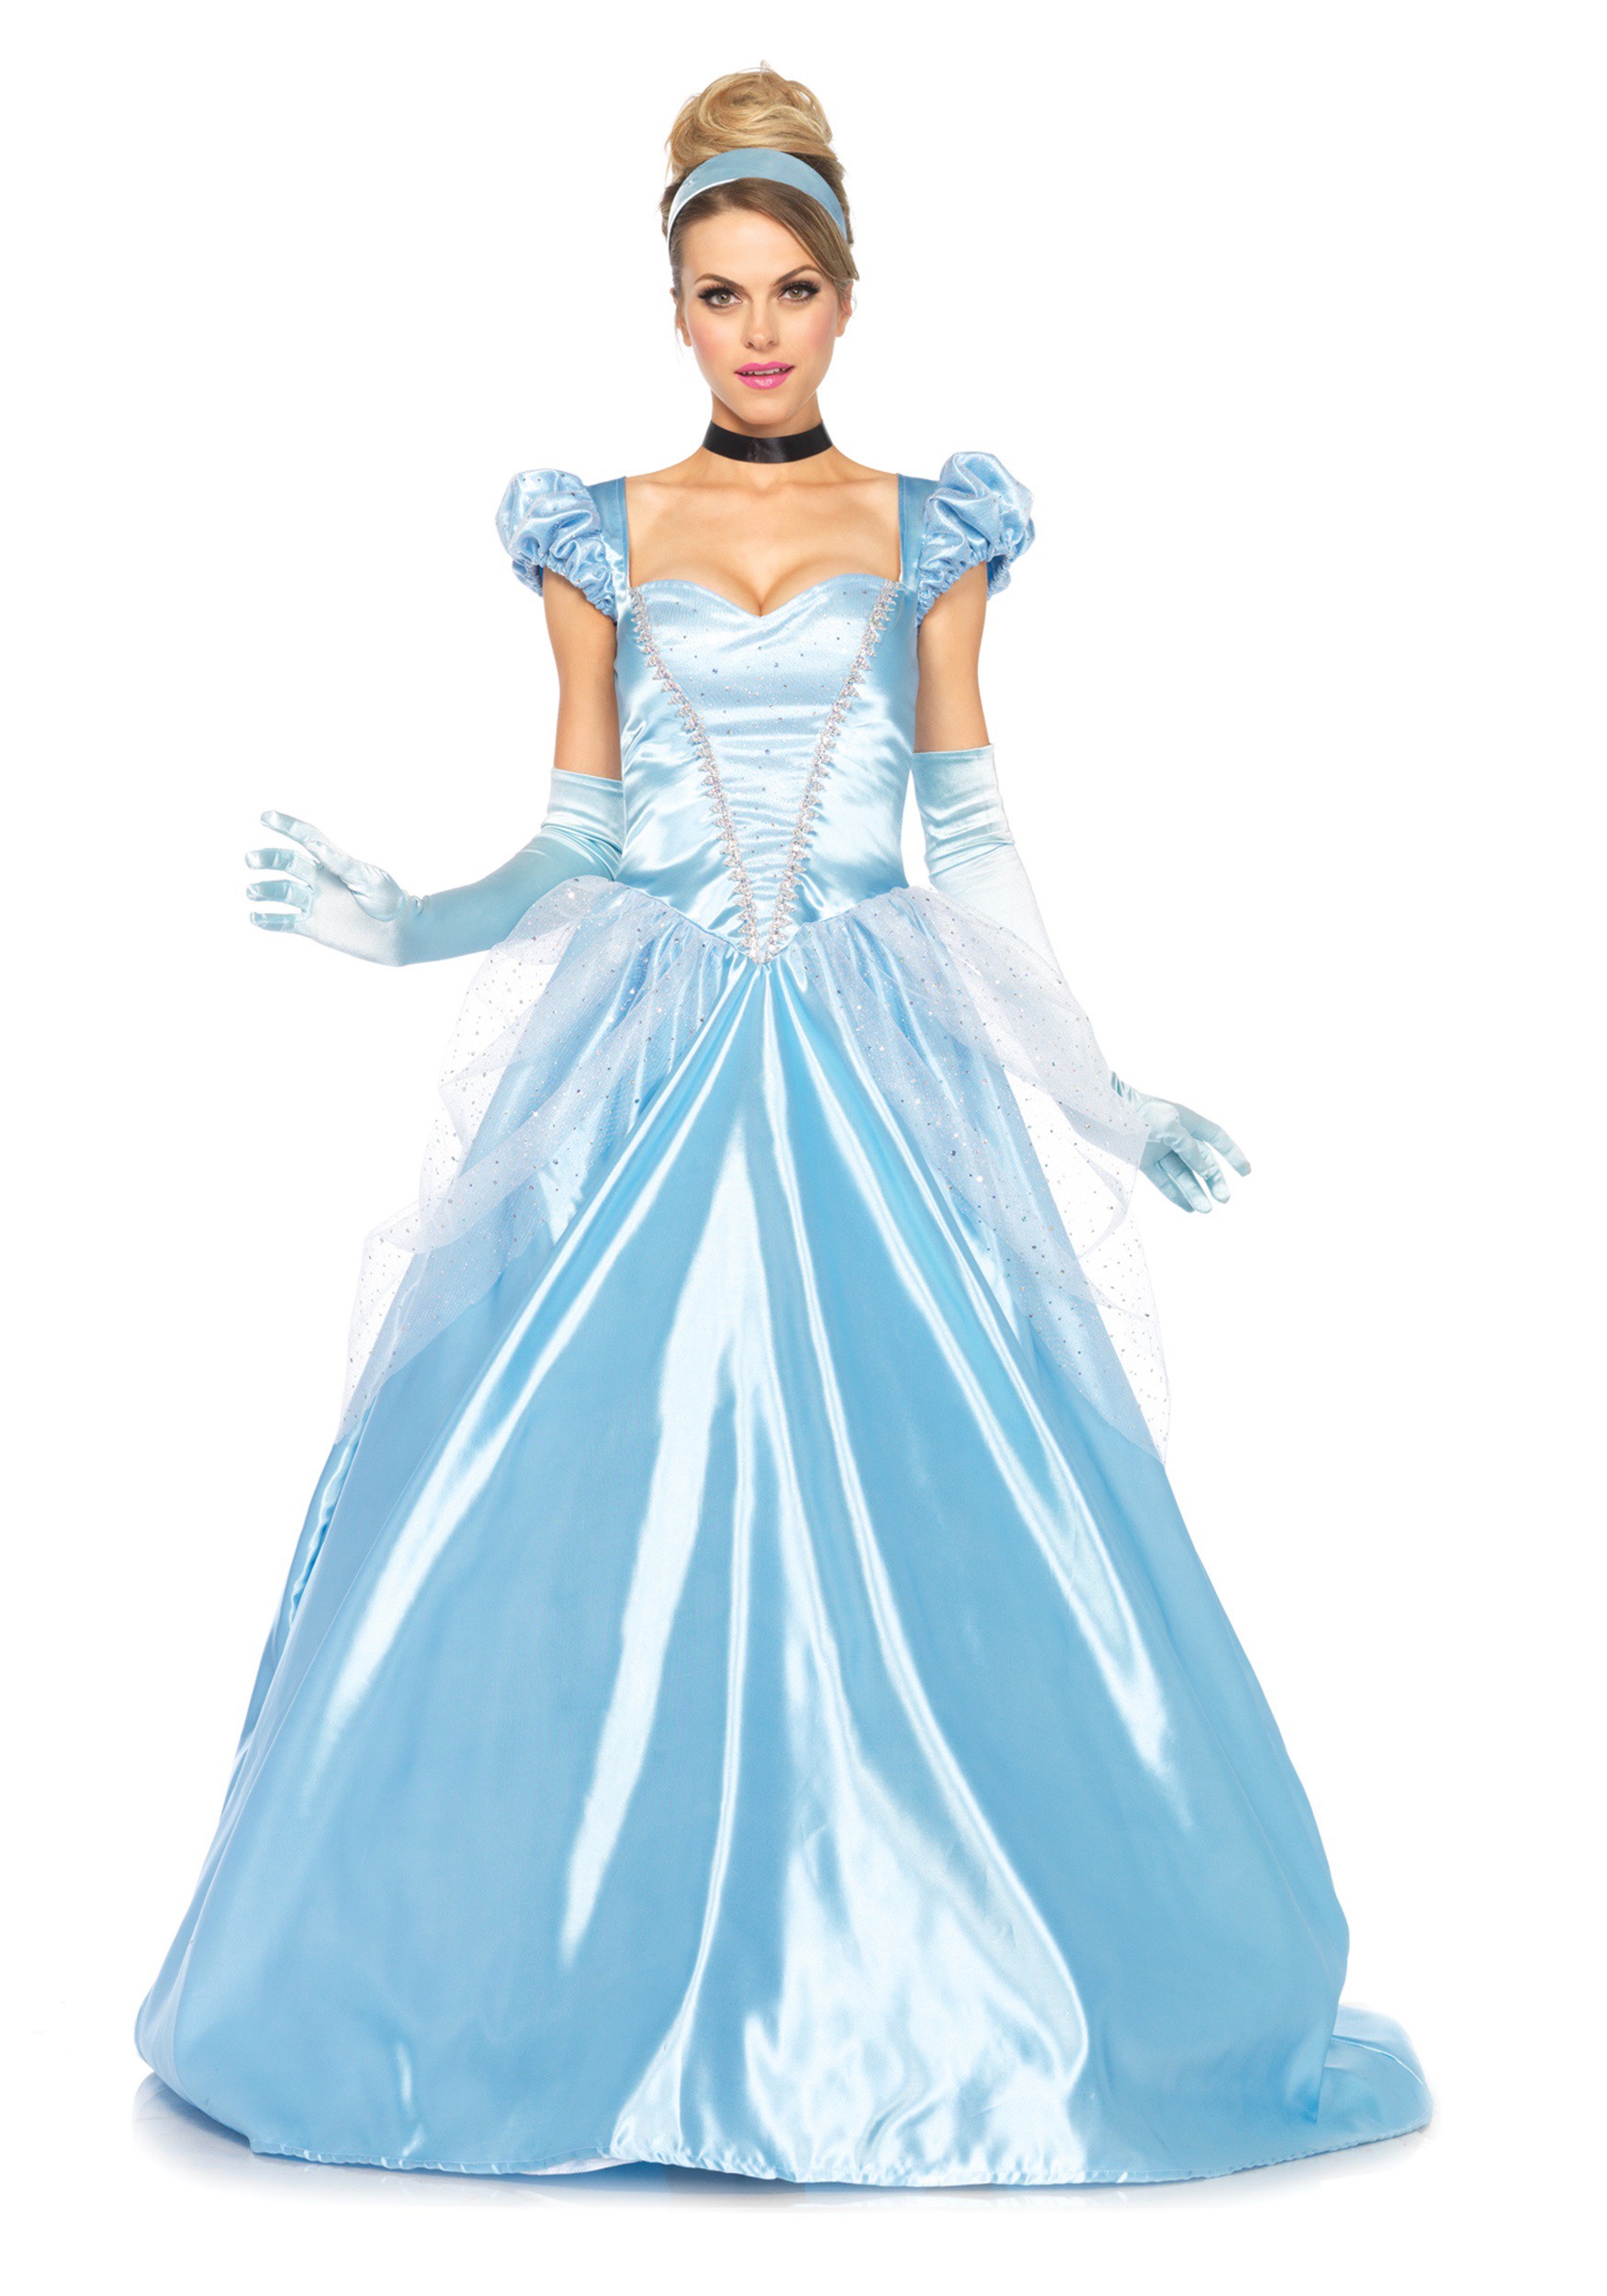 Cinderella Costume: Classic Full Length Gown for Women